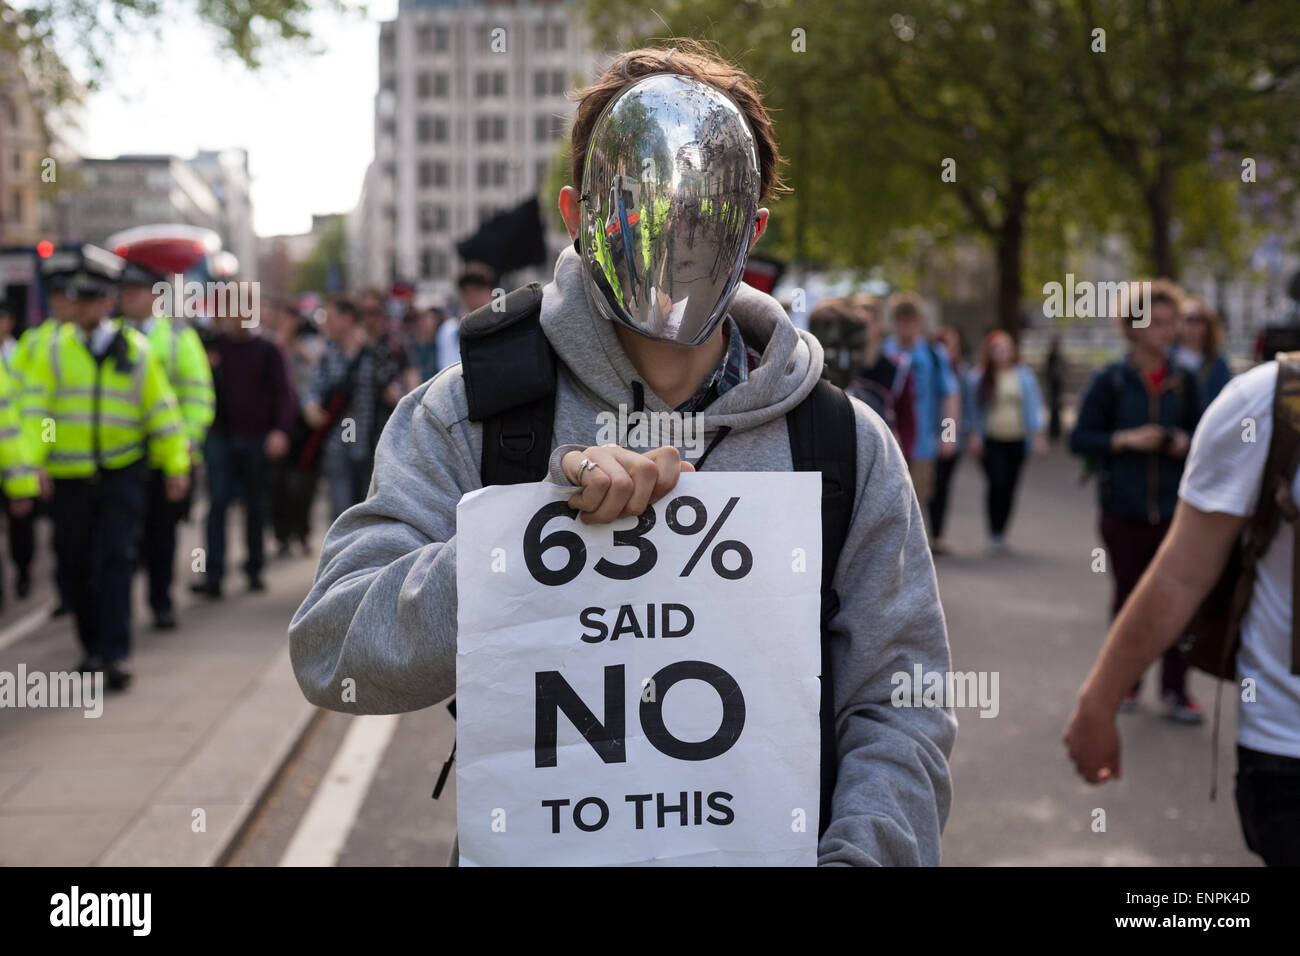 London, UK. 9th May, 2015. Demonstrators take part in an anti-Tory protest held in central London two days after the UK general election gave David Cameron's Conservative Party - the Tories - a parliamentary majority. The centre-right Conservative Party are now set to govern the UK for the next five years without the need to form a coalition with any other party. Credit:  David Cliff/Alamy Live News Stock Photo